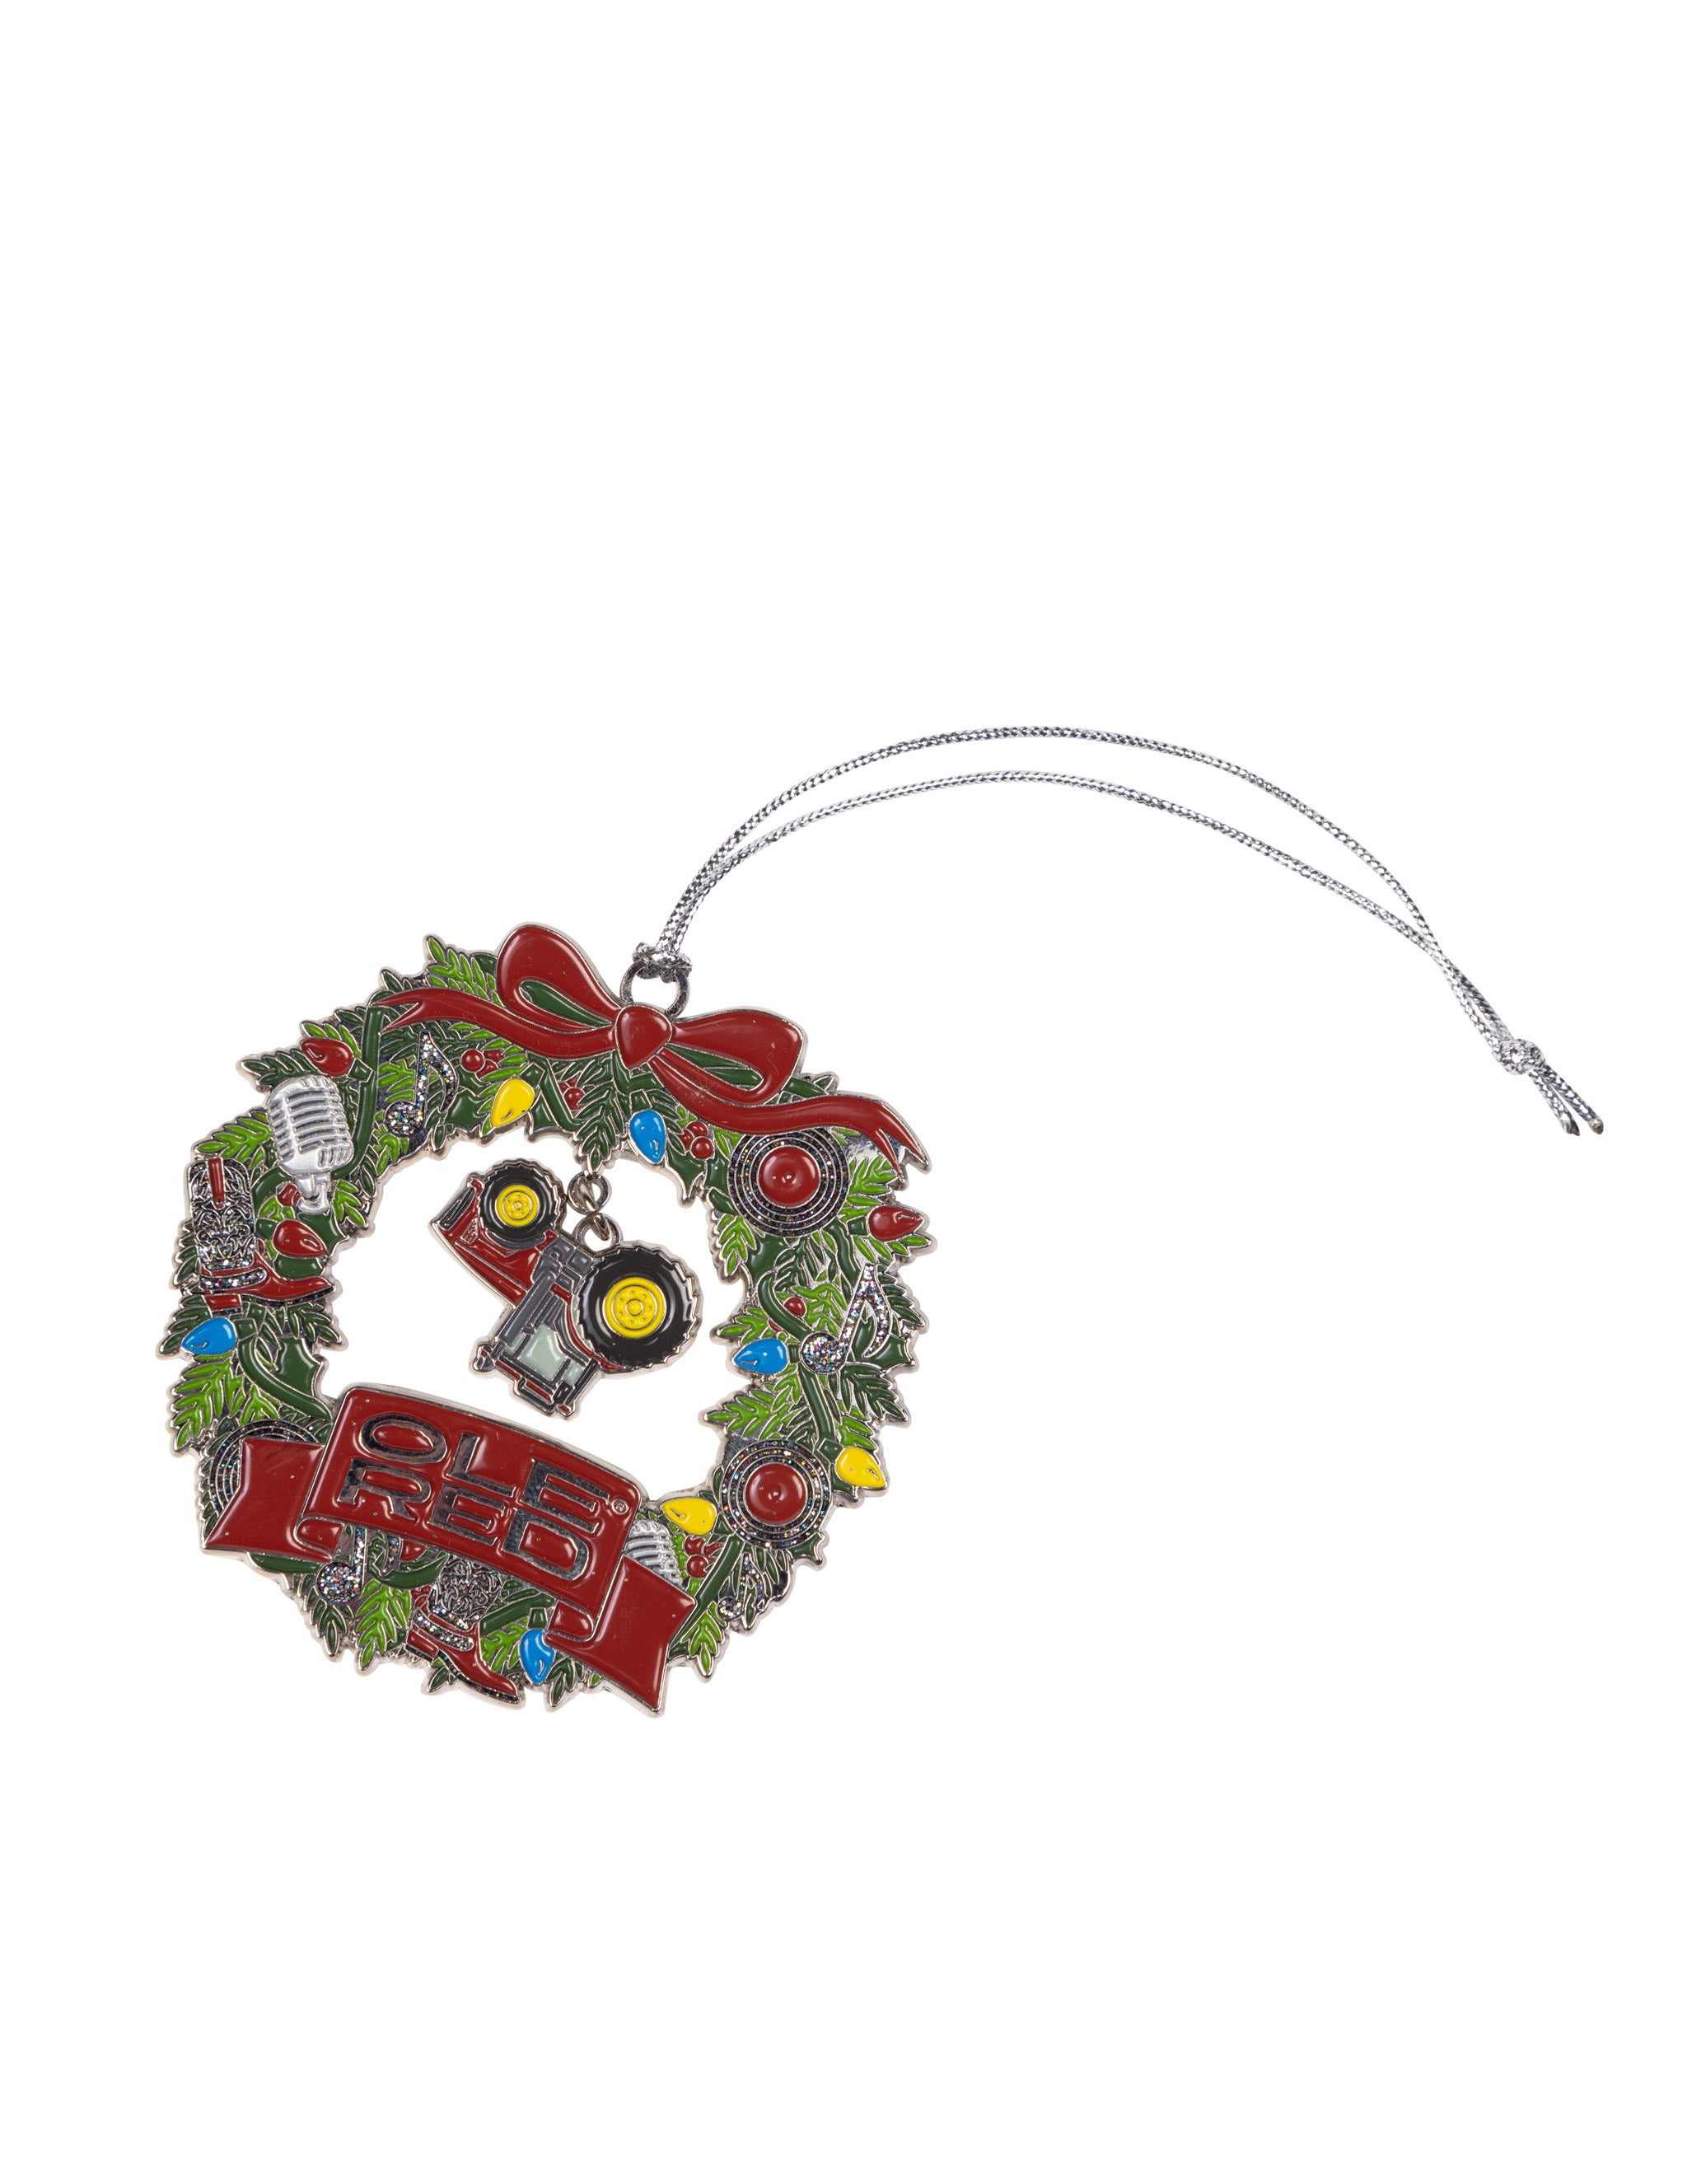 Ole Red Upside Down Tractor Wreath Ornament